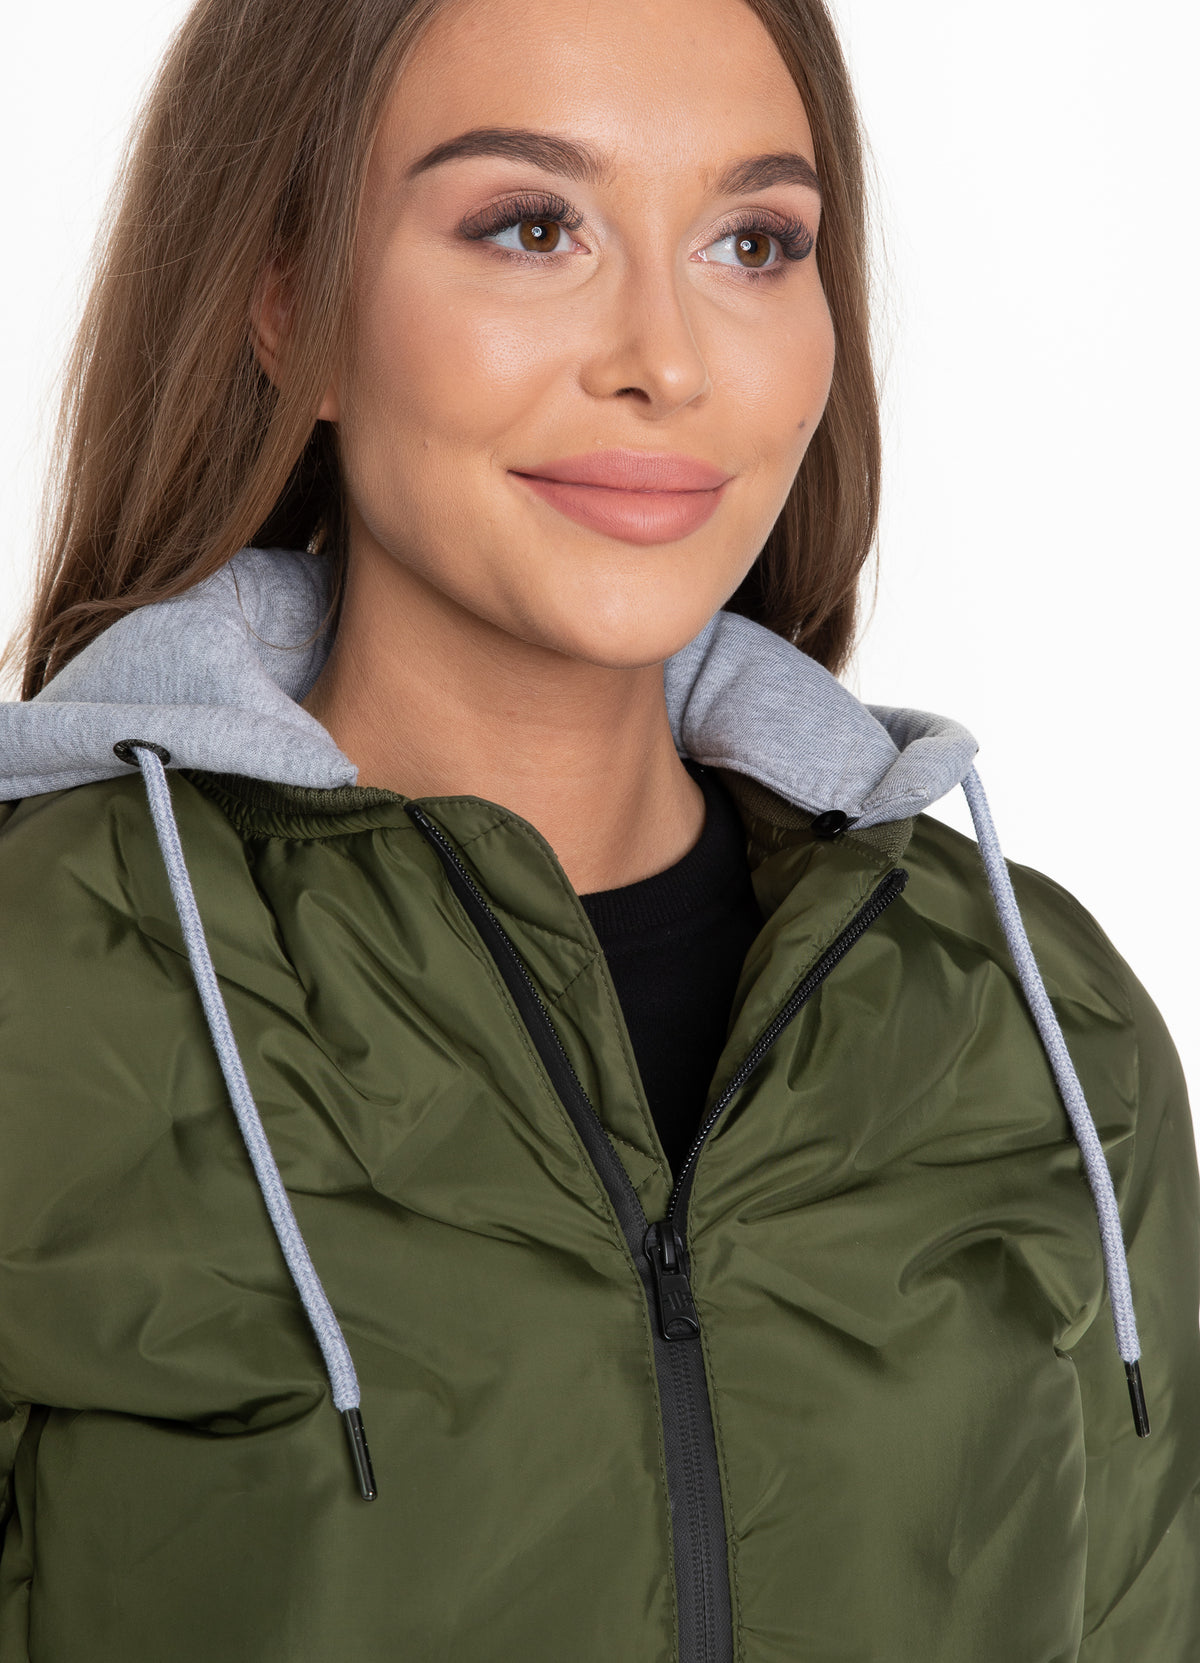 Women's Quilted Jacket Winchester Olive - Pitbull West Coast International Store 